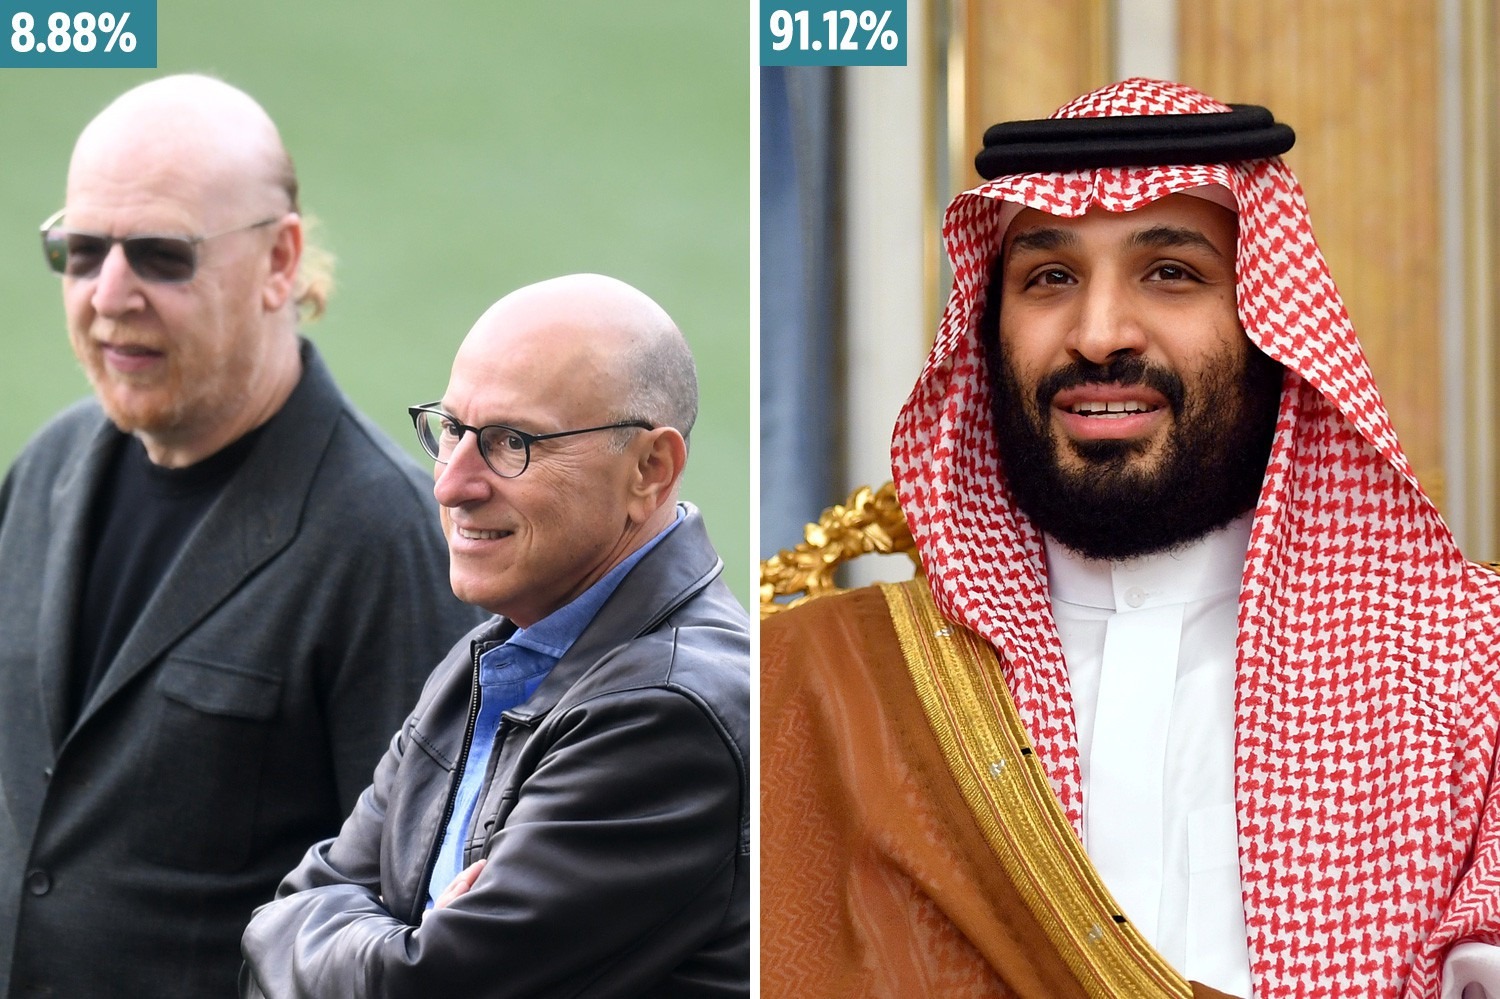 , Mega-rich Saudi dictator Bin Salman wanted by 91 per cent of Man Utd fans over hated Glazers despite human rights fears